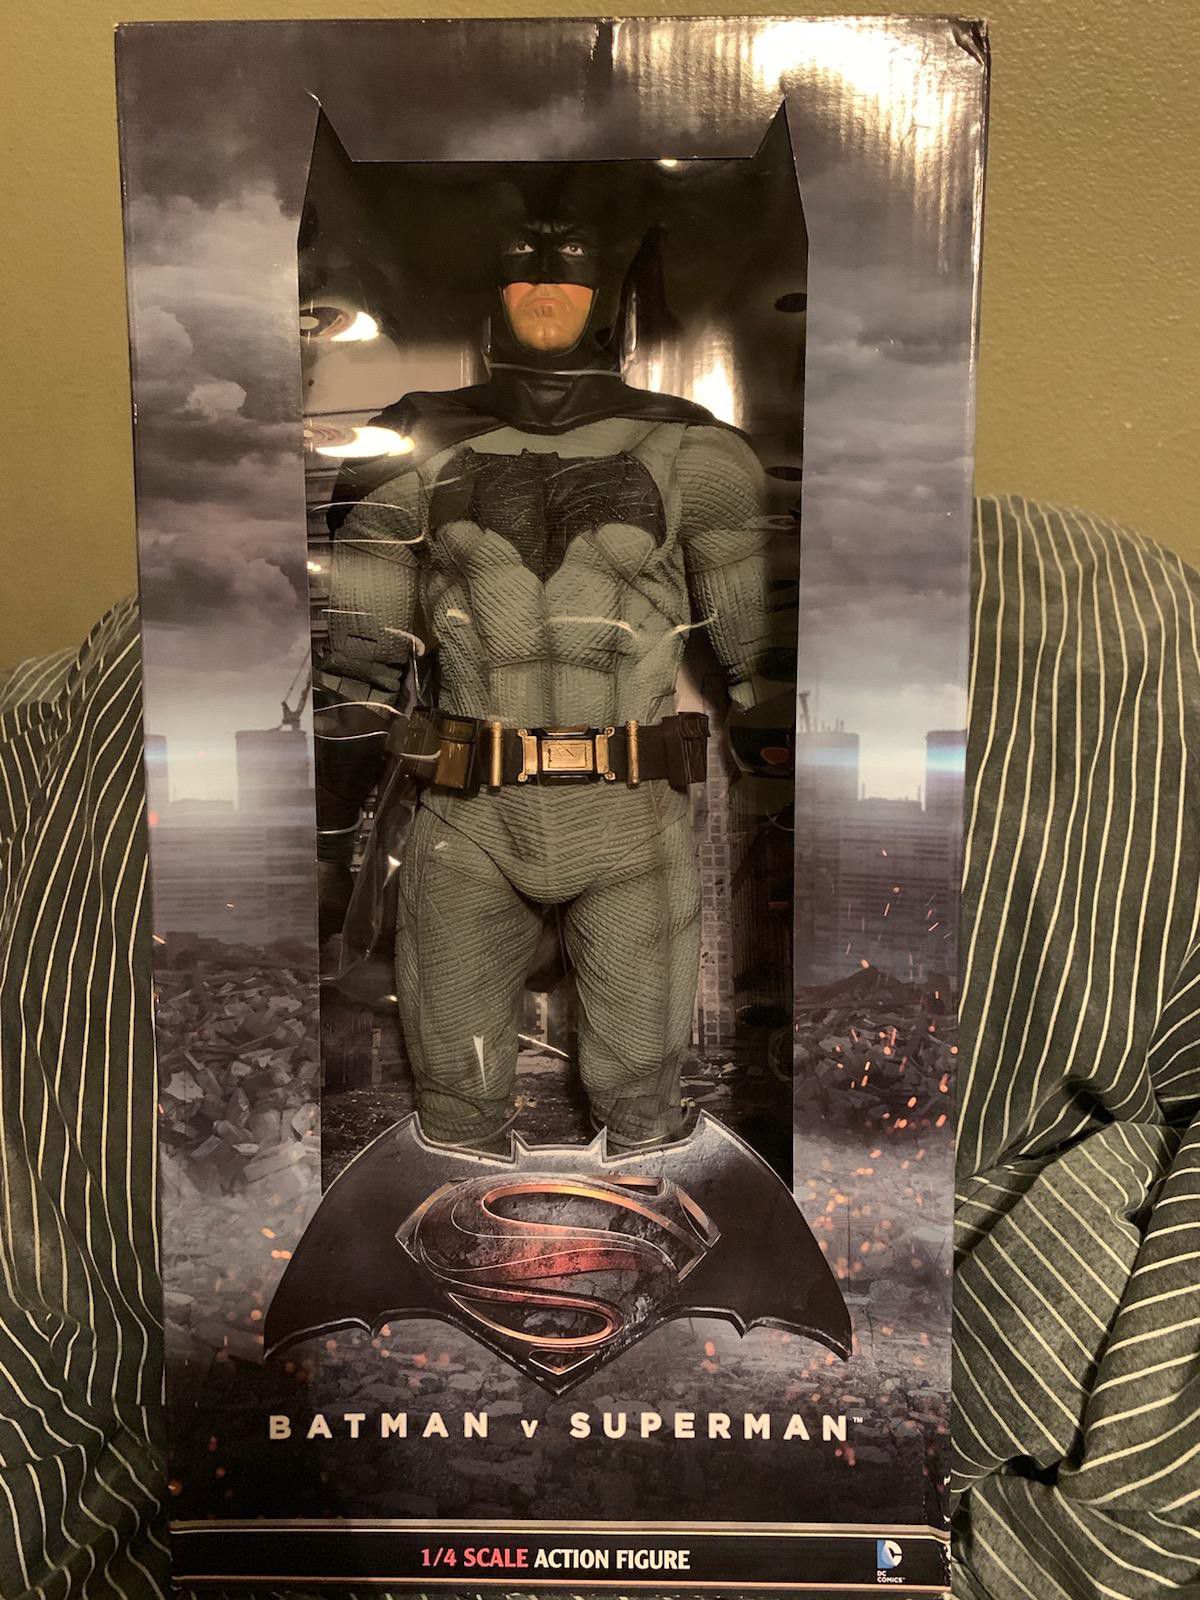 TODAY ONLY! Batman 1/4 scale action figure